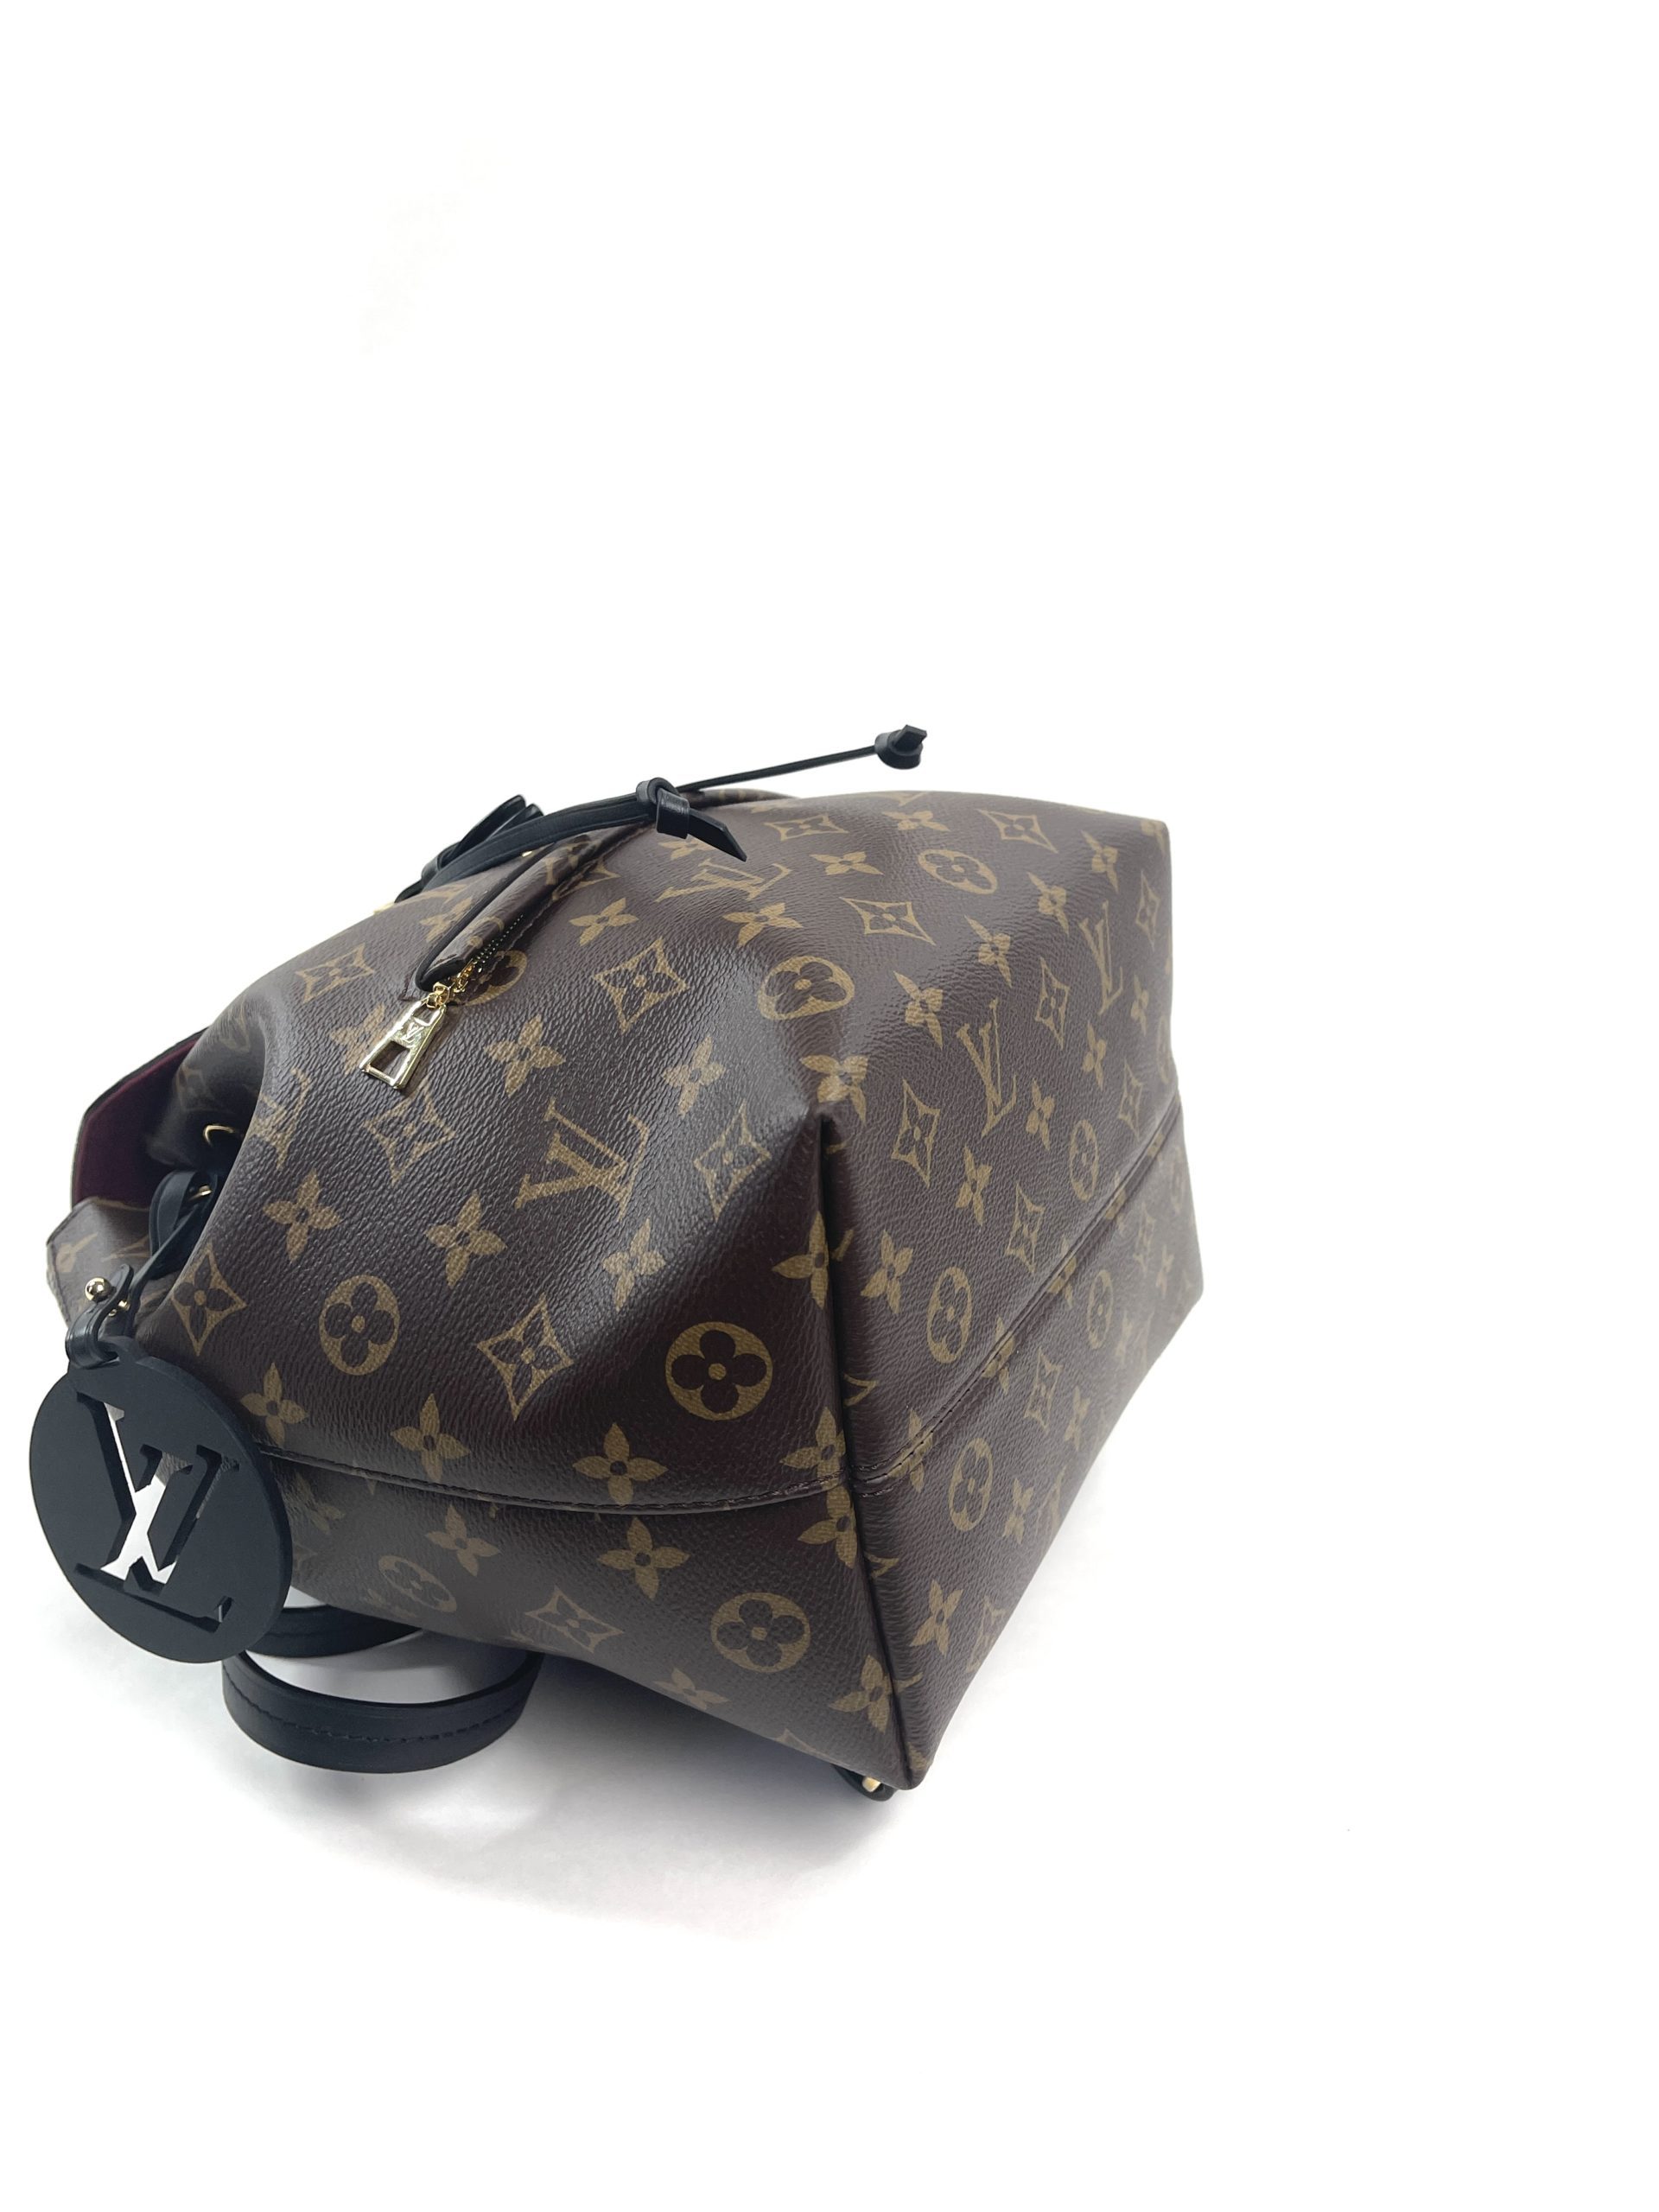 louis vuitton backpack for women clearance sale